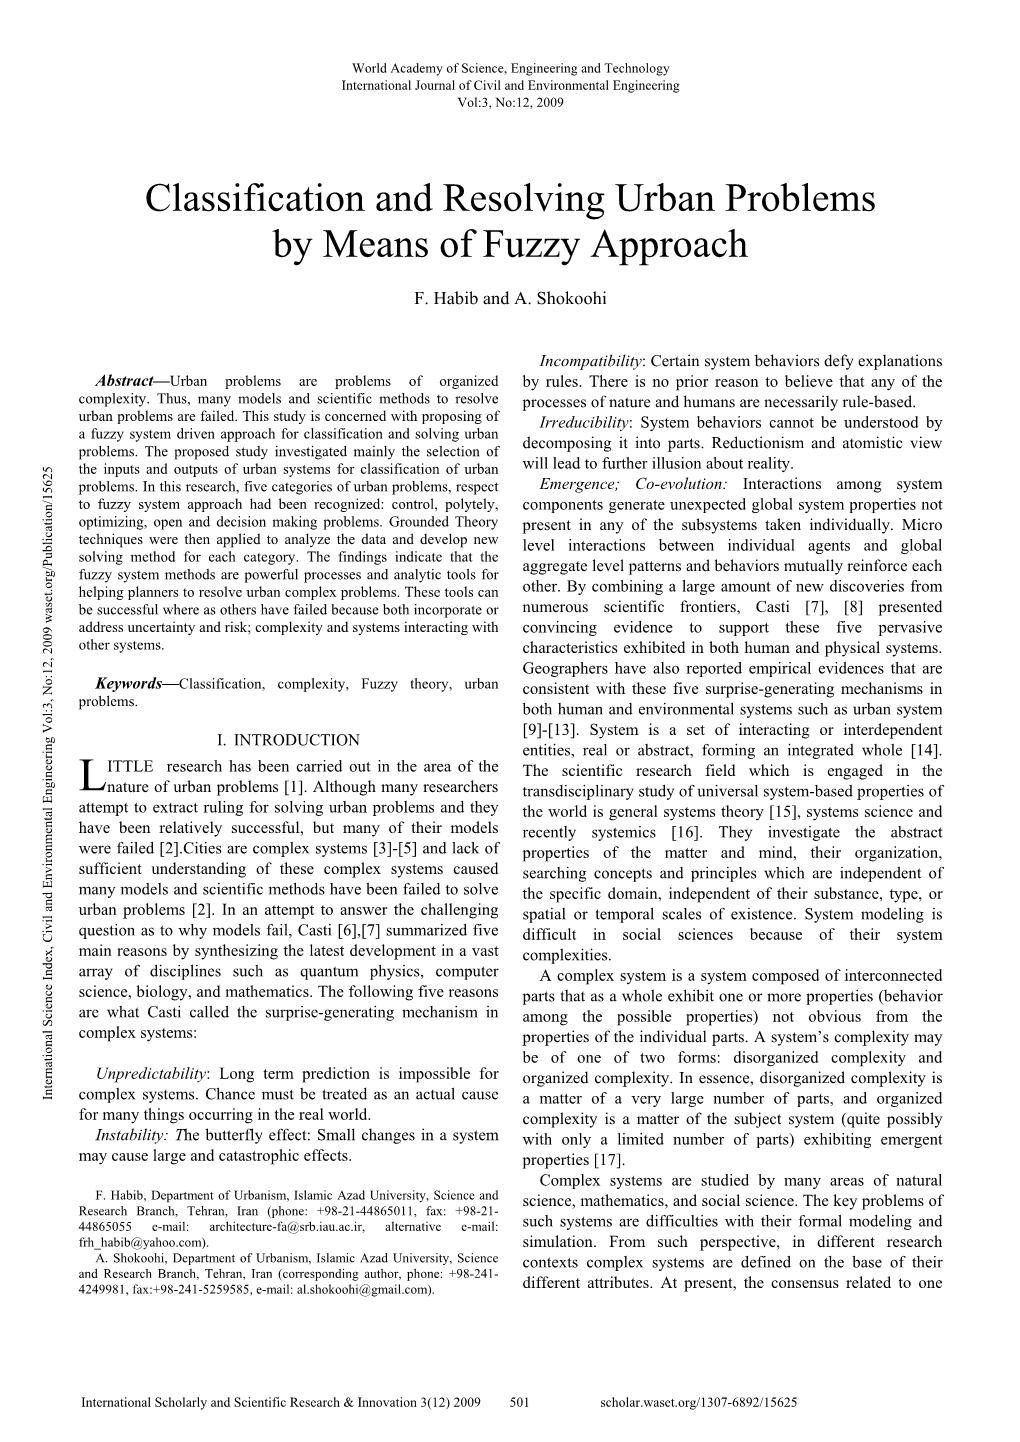 Classification and Resolving Urban Problems by Means of Fuzzy Approach